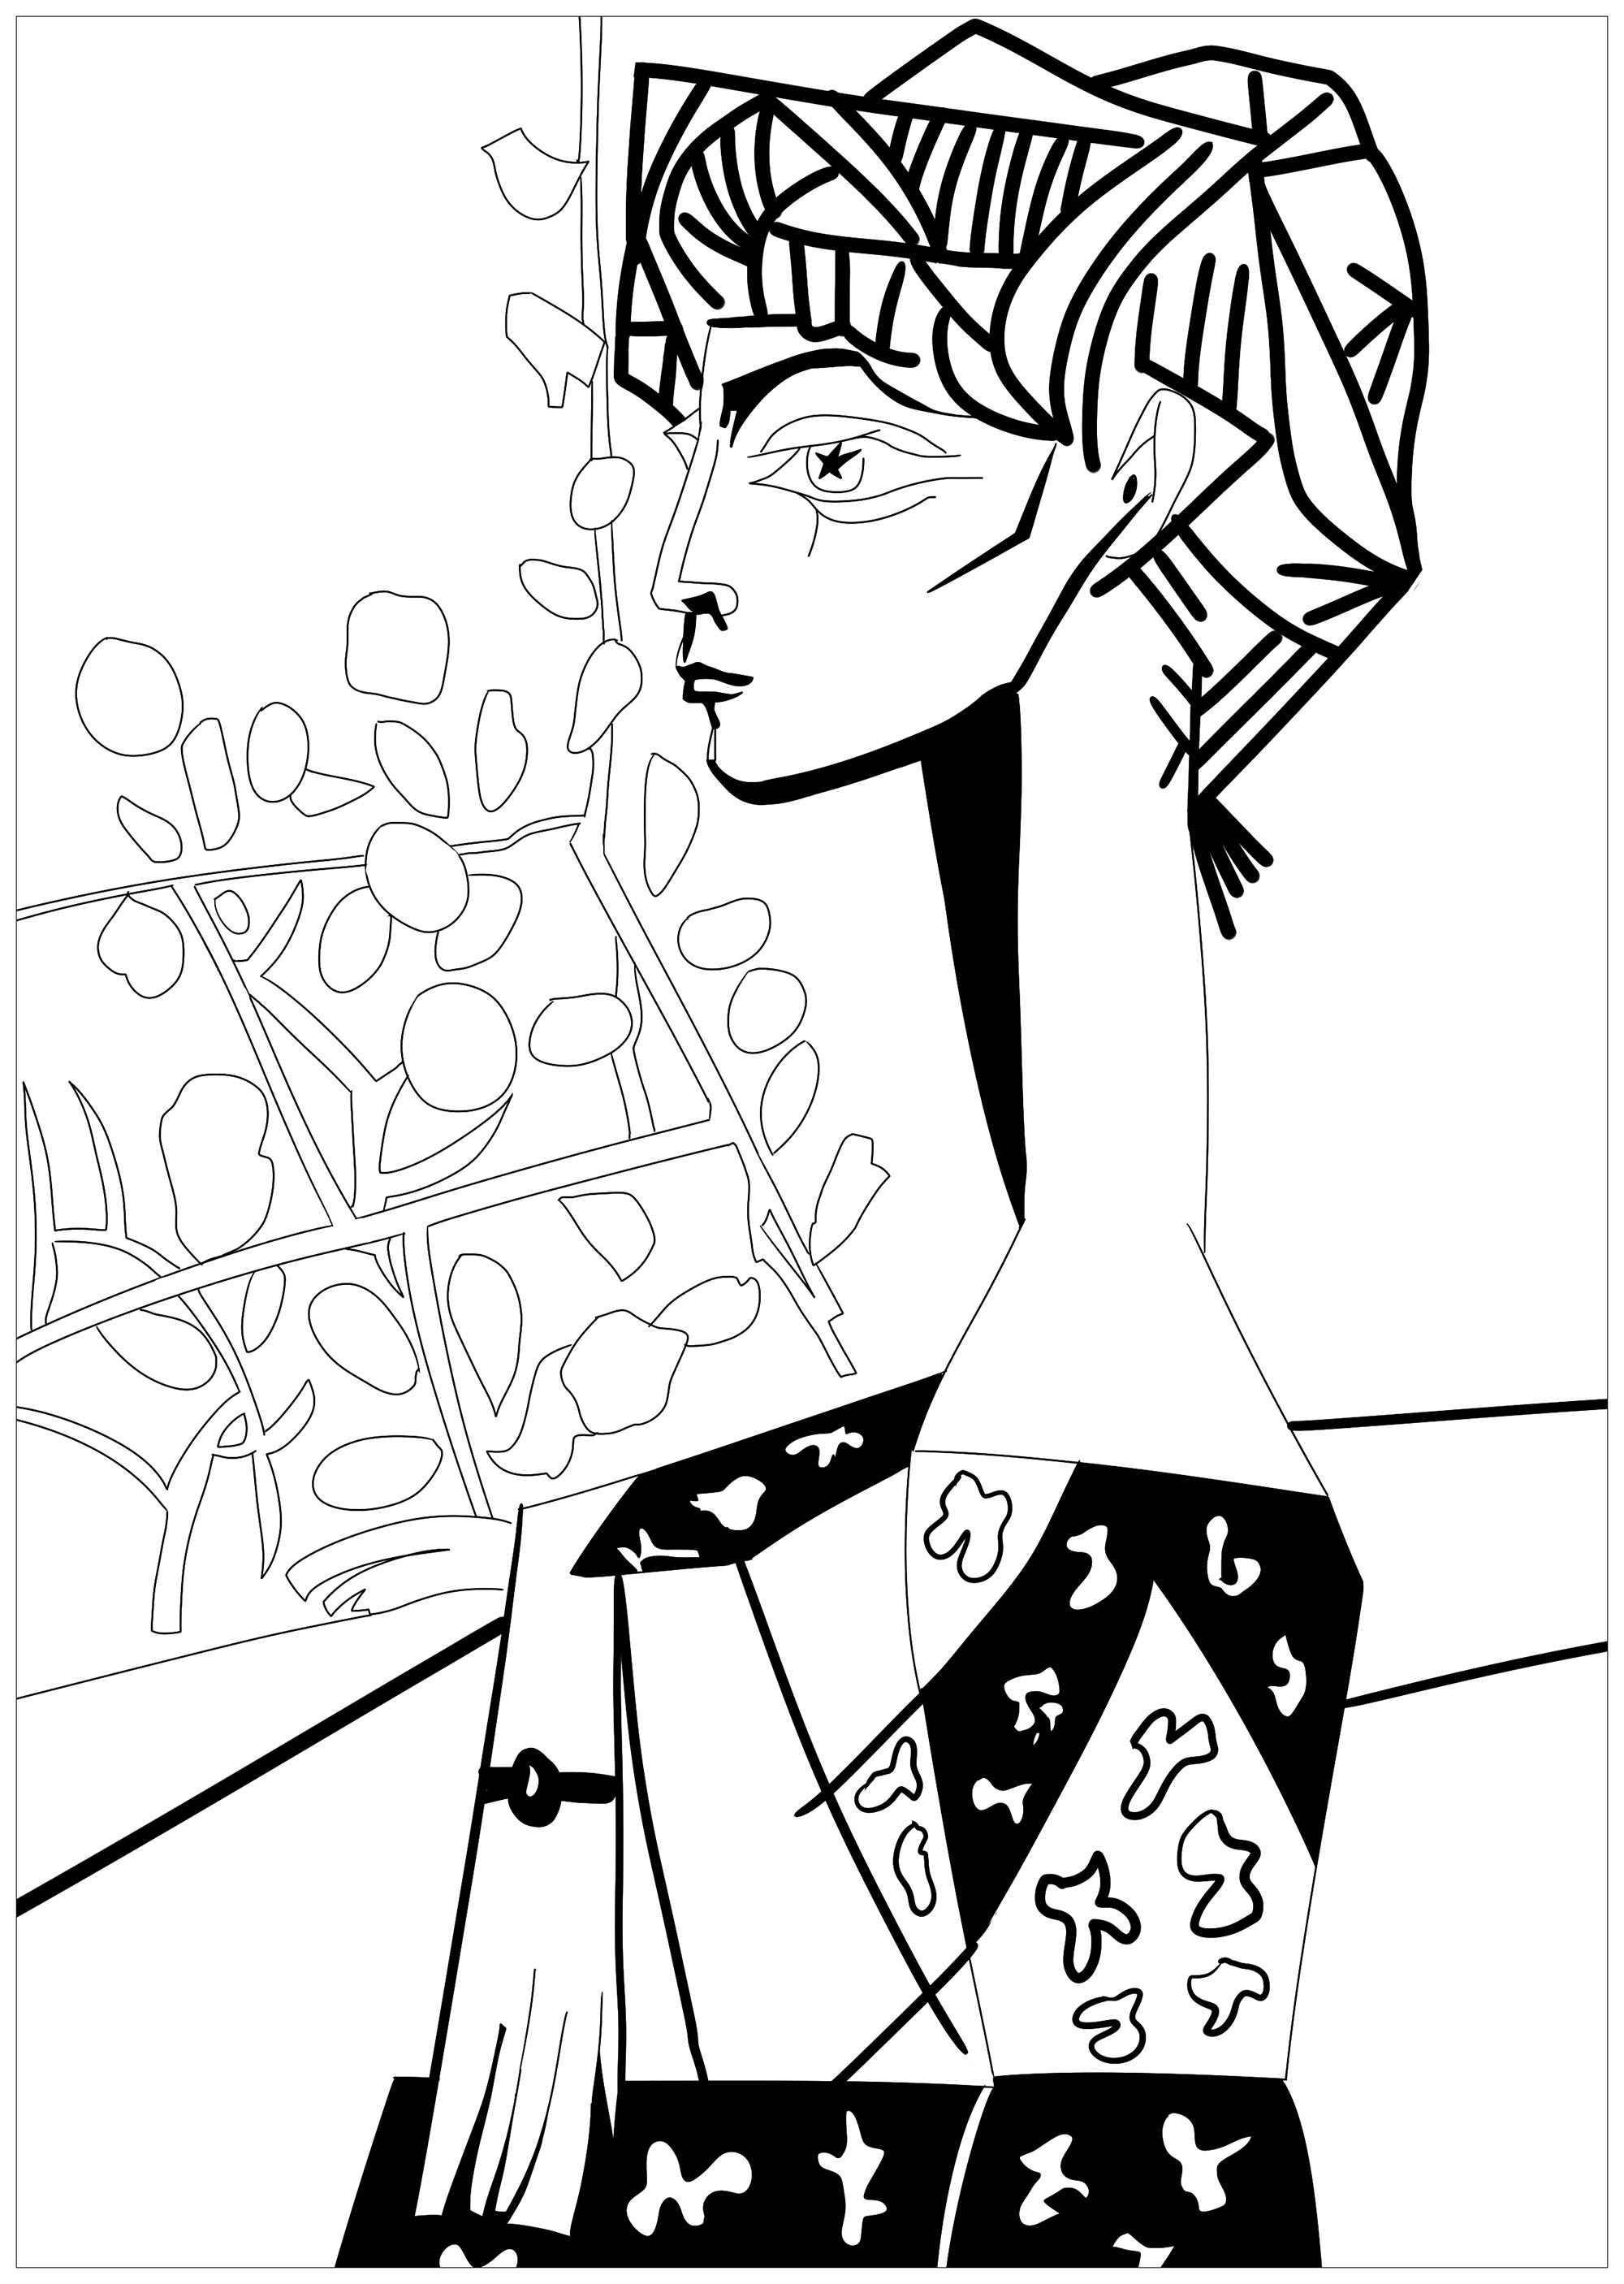 Coloring page inspired by a master piece by Pablo Picasso : Jacqueline with Flowers, Artist : Ji. M